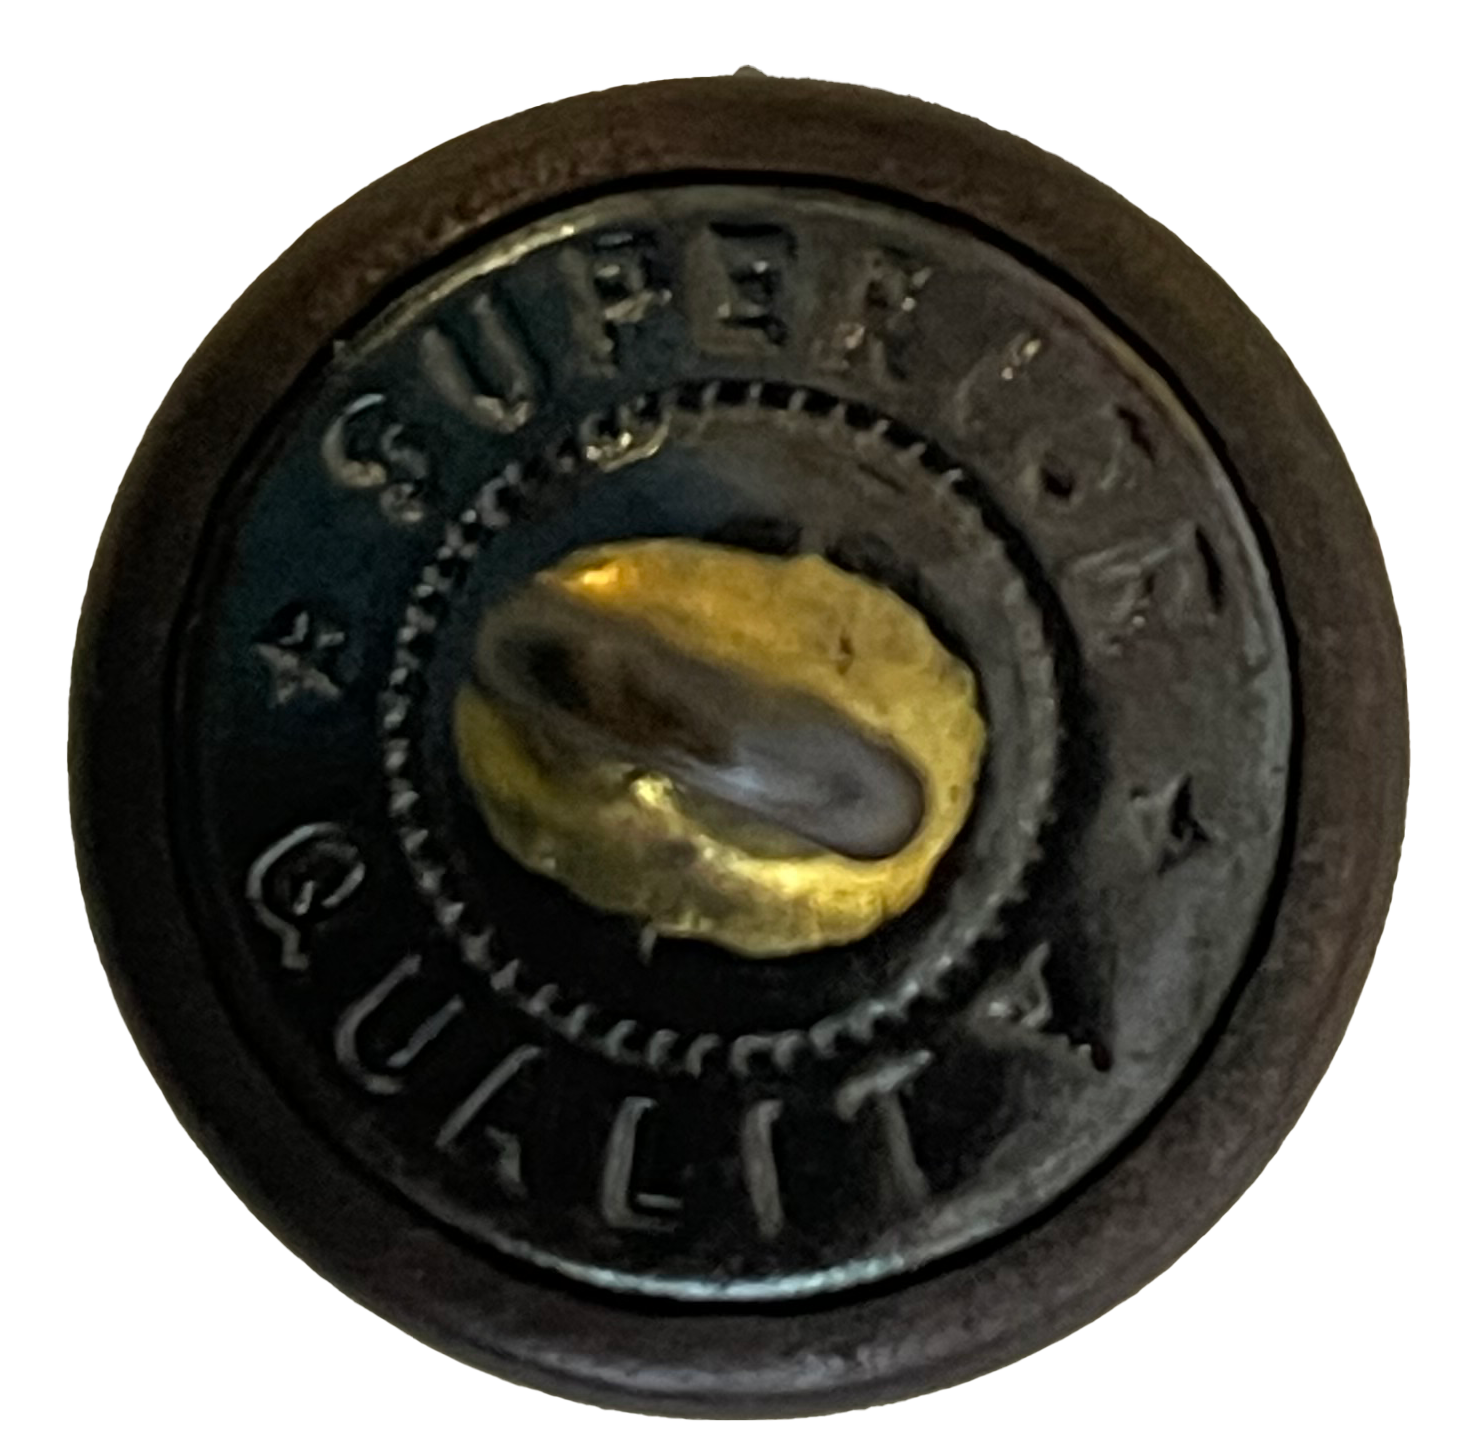 Back view of button marked "Superior Quality"